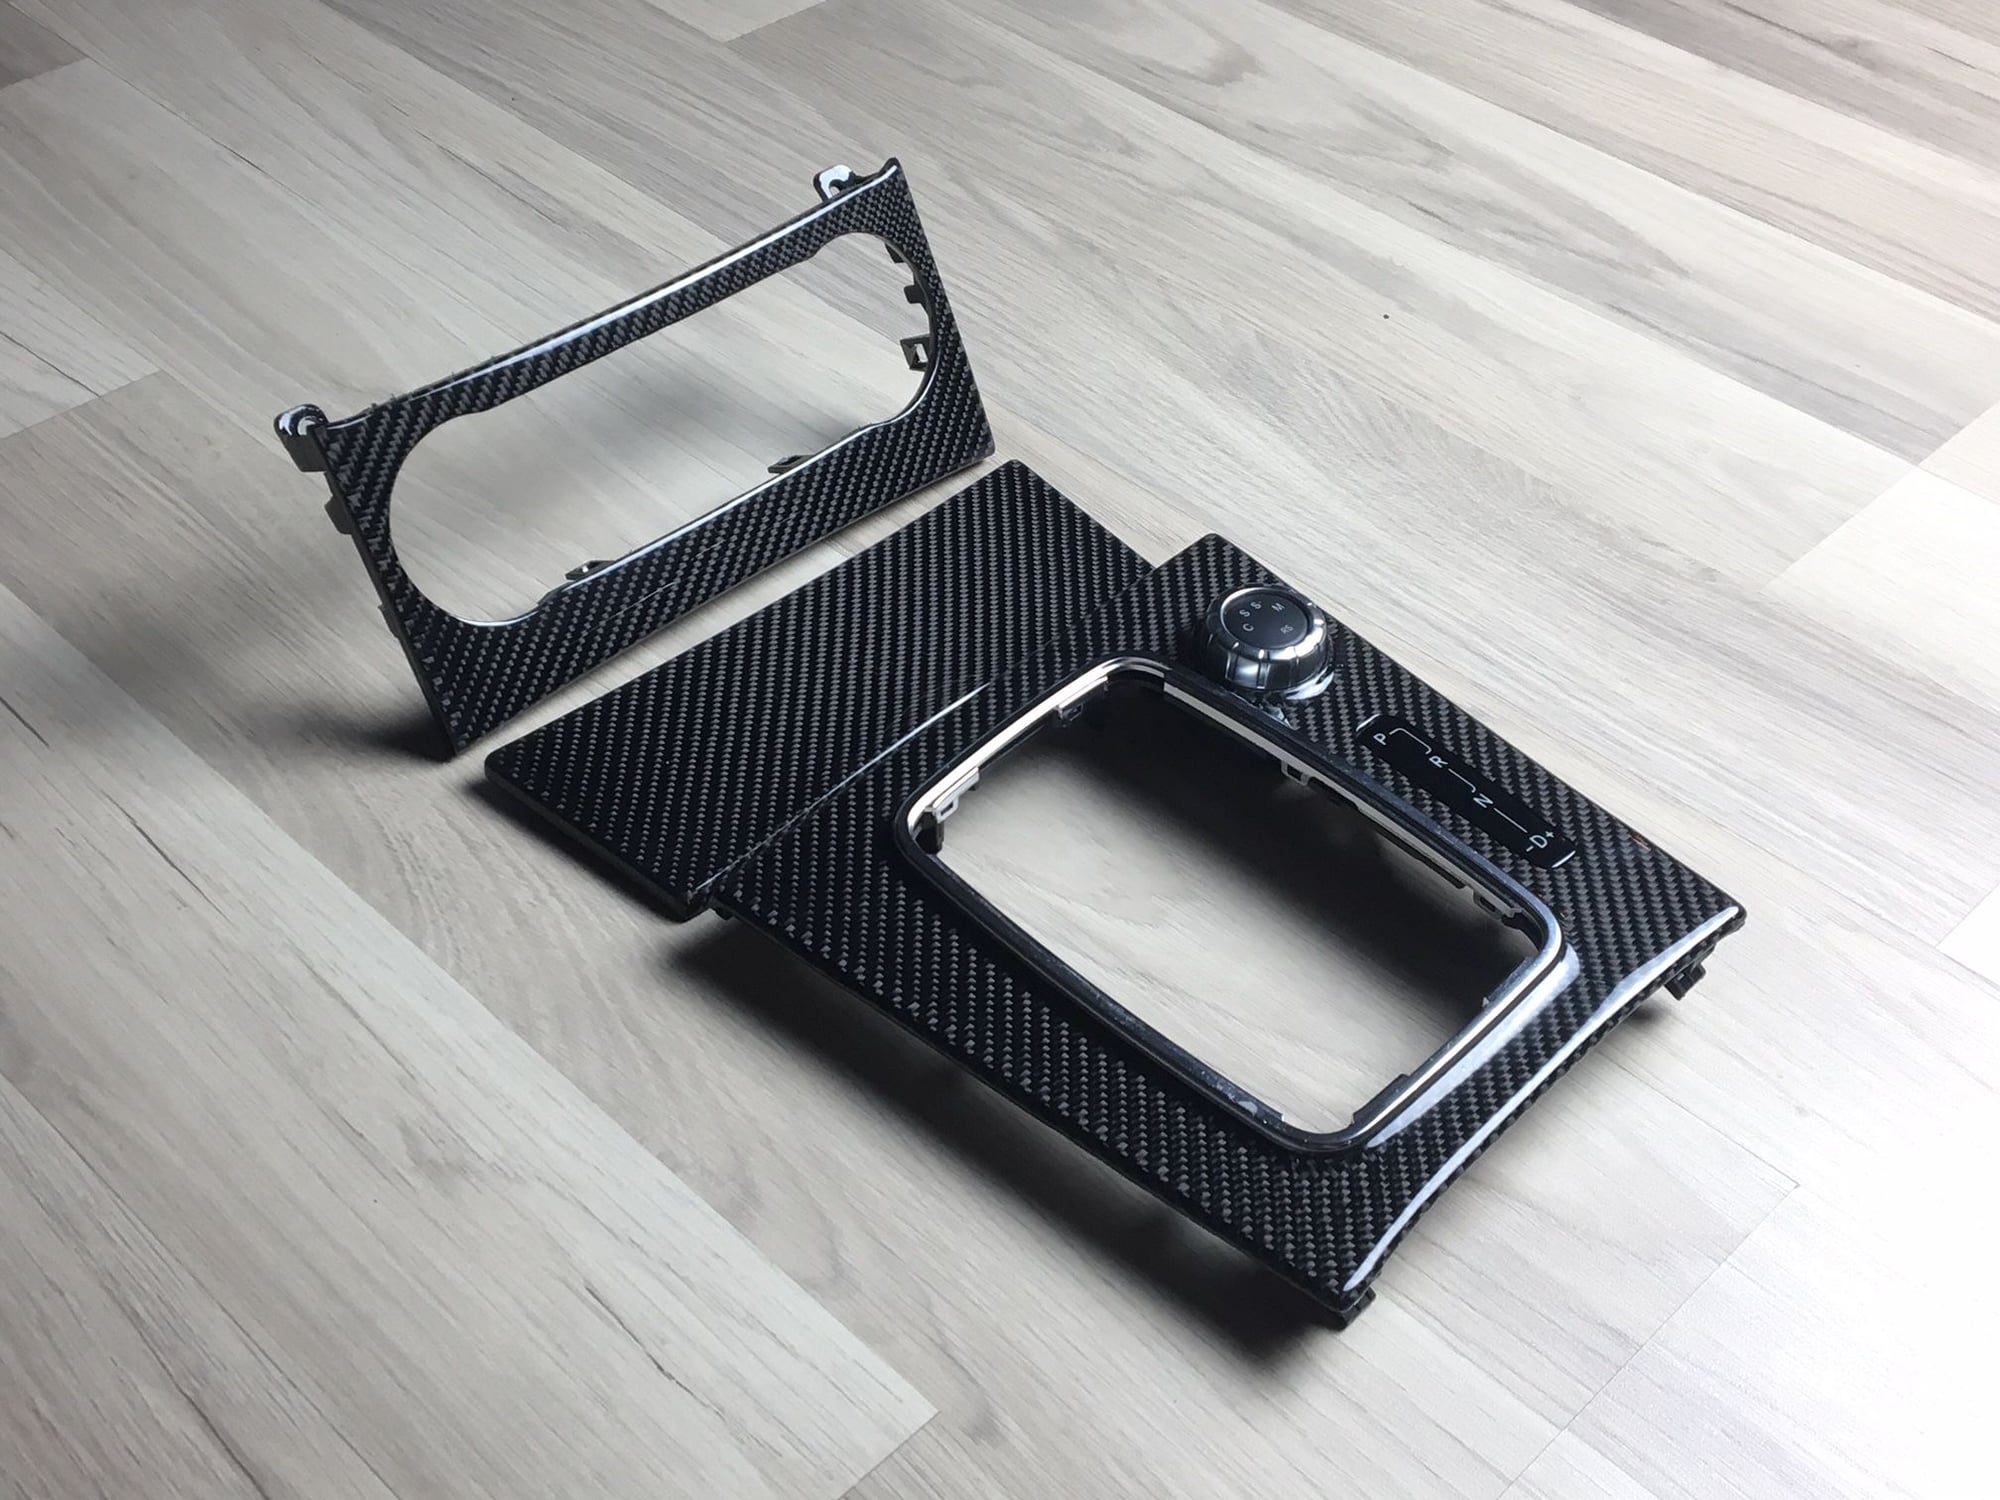 Interior/Upholstery - FS: 2011+ RHD C63 CF lower trims - ash tray, gear shifter, and A/C control trims - New - 2011 to 2014 Mercedes-Benz C63 AMG - Kolobrzeg, Poland